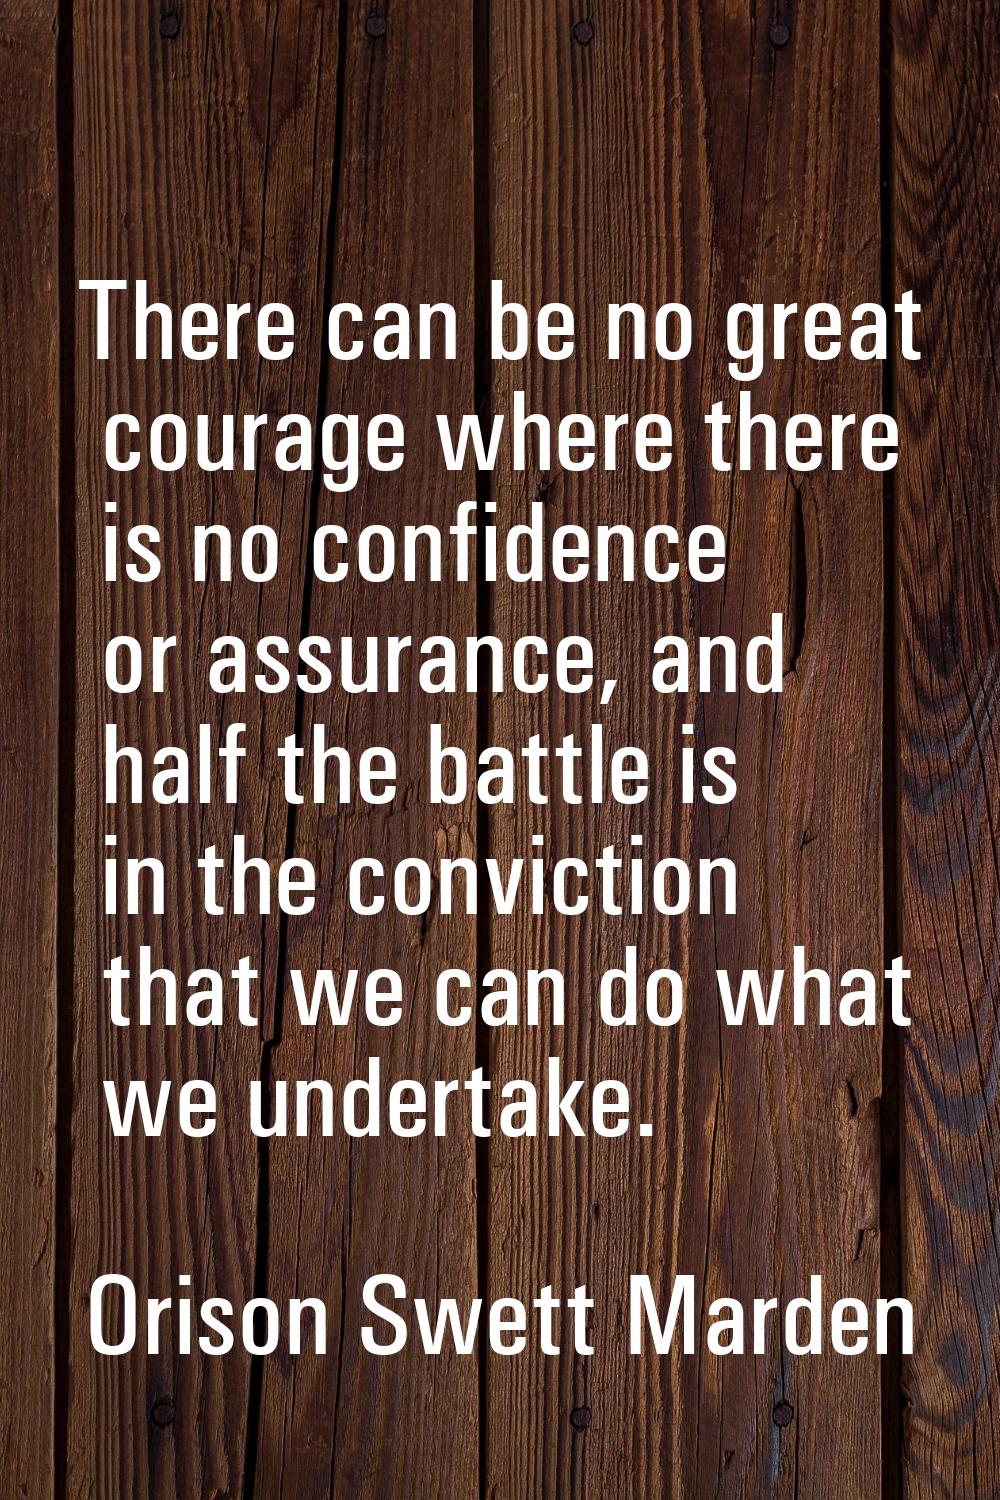 There can be no great courage where there is no confidence or assurance, and half the battle is in 